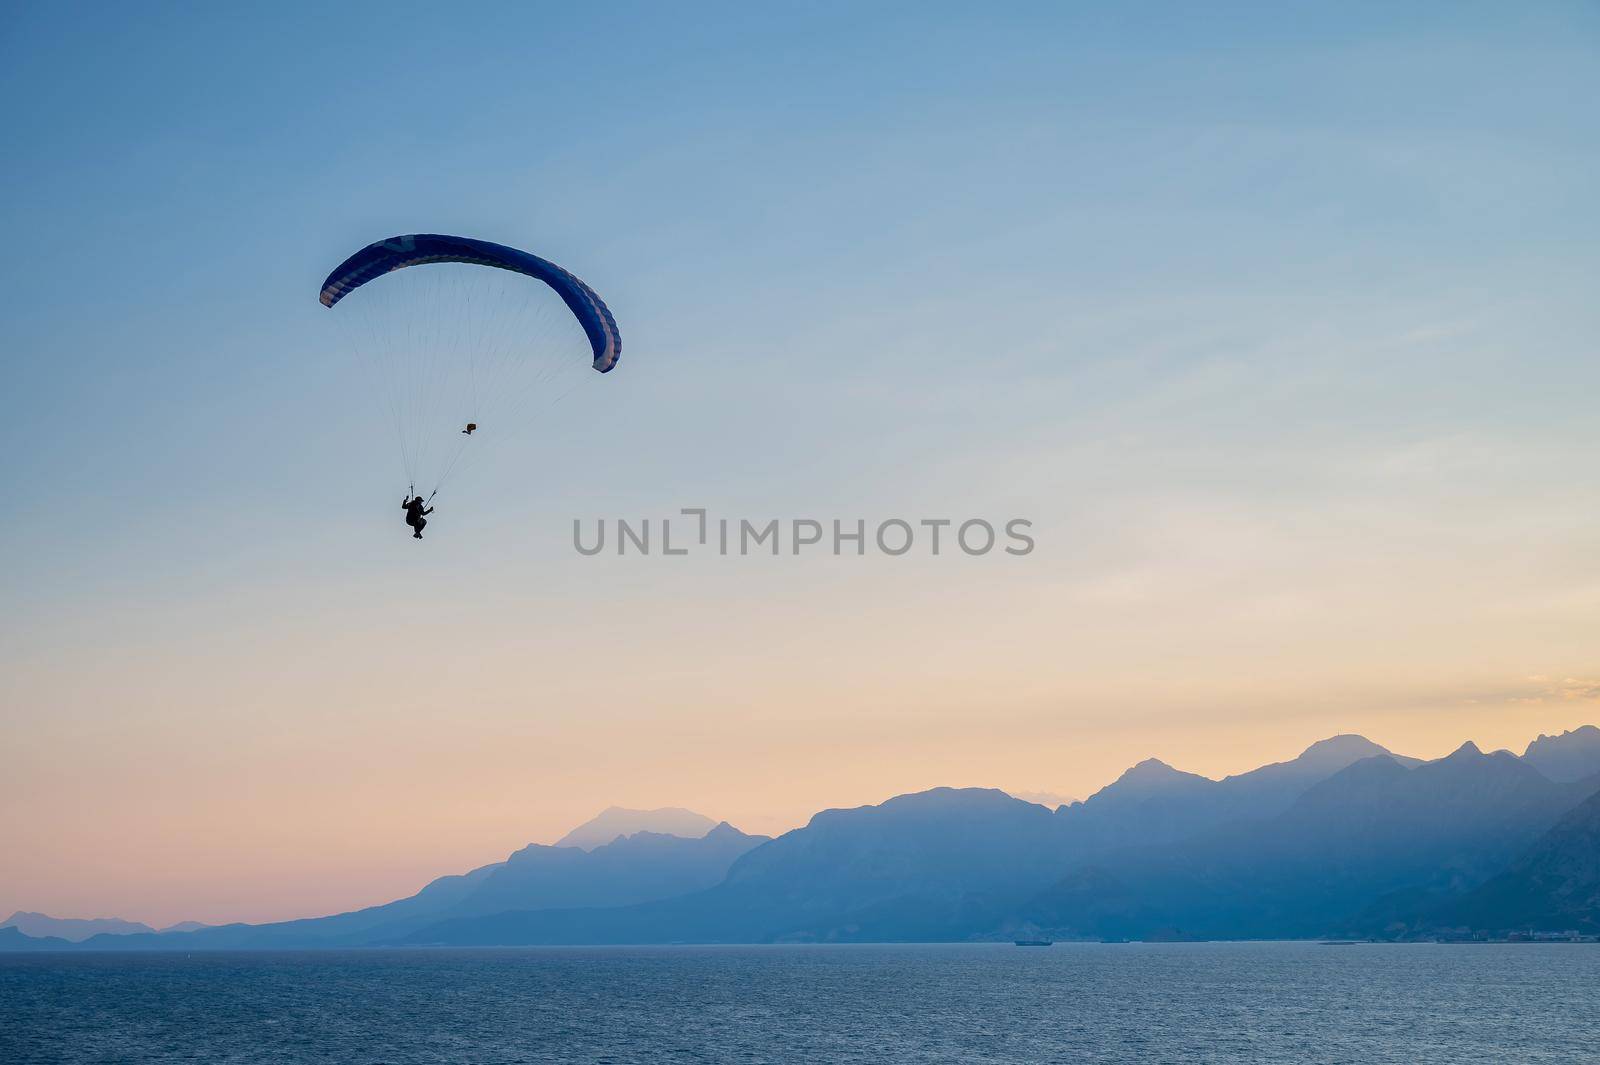 Silhouette of a man on a paraglider flying over the sea at sunset. by mrwed54